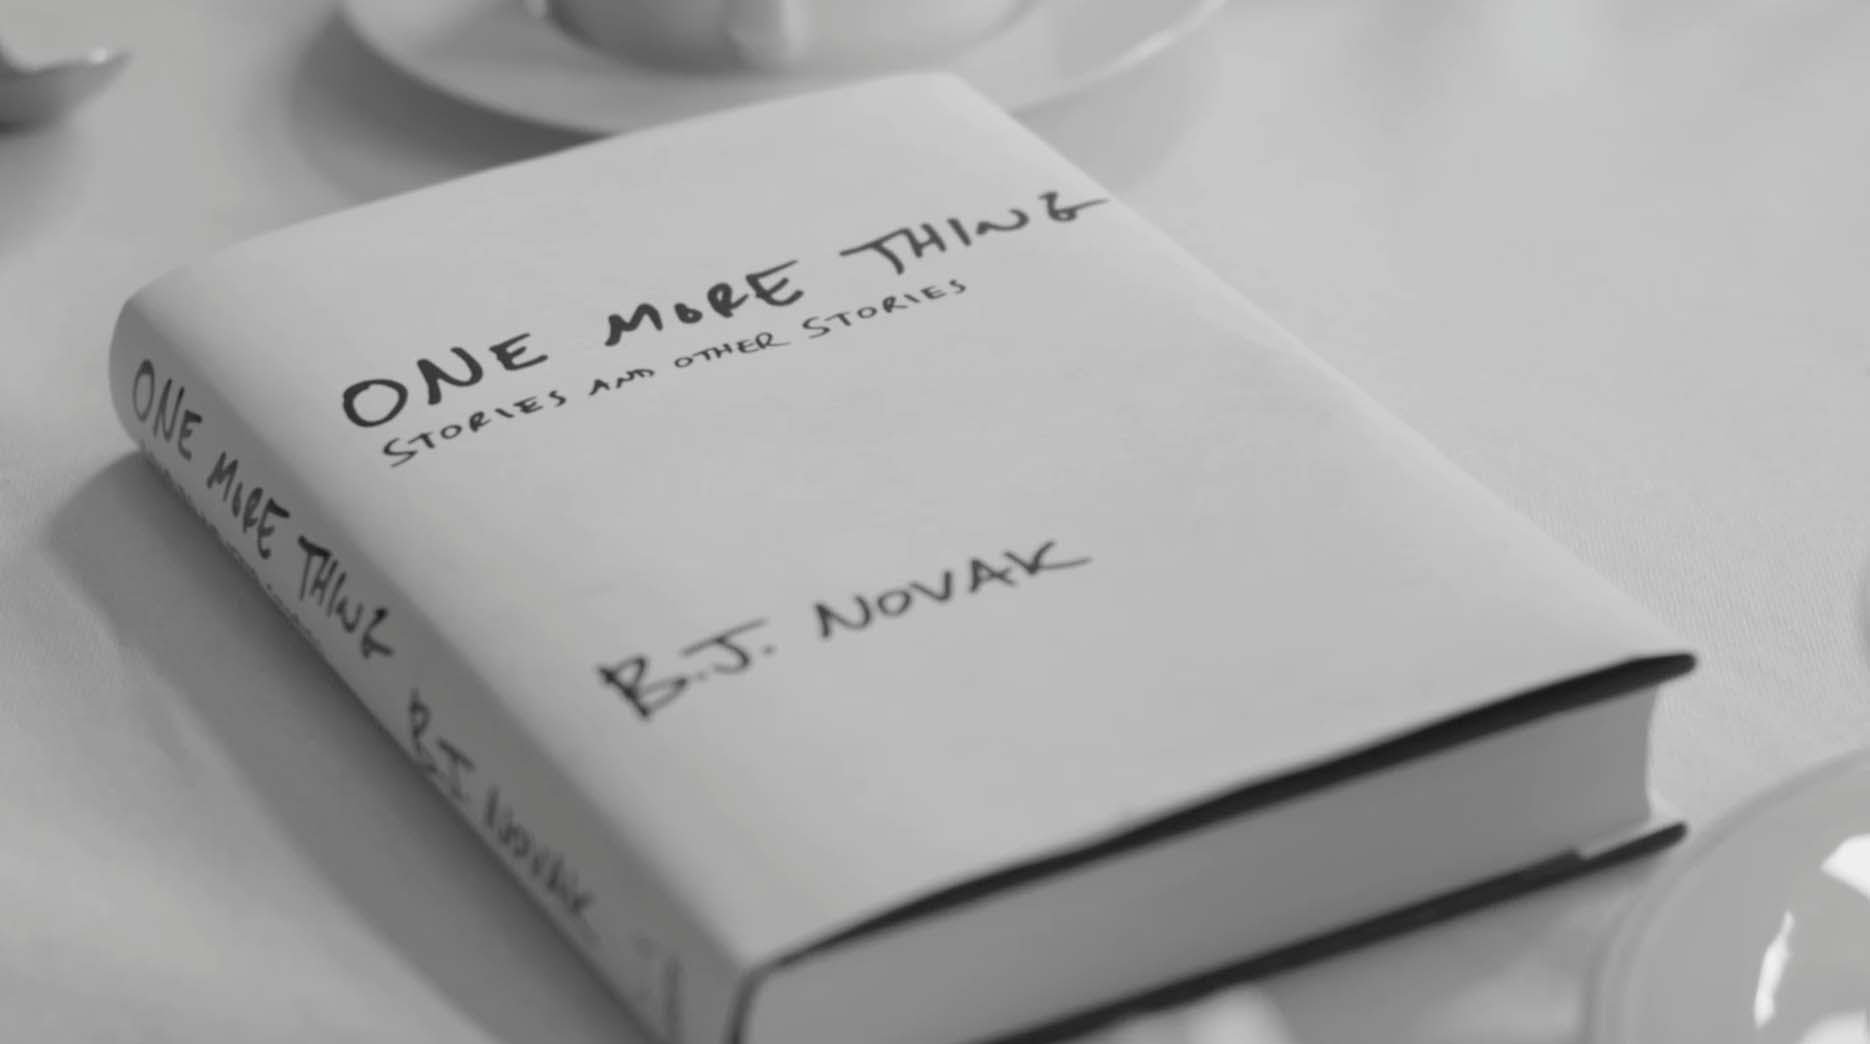 The 1 thing book. Трейлер книги. Трейлер новой книги. One thing book. The book of many things.